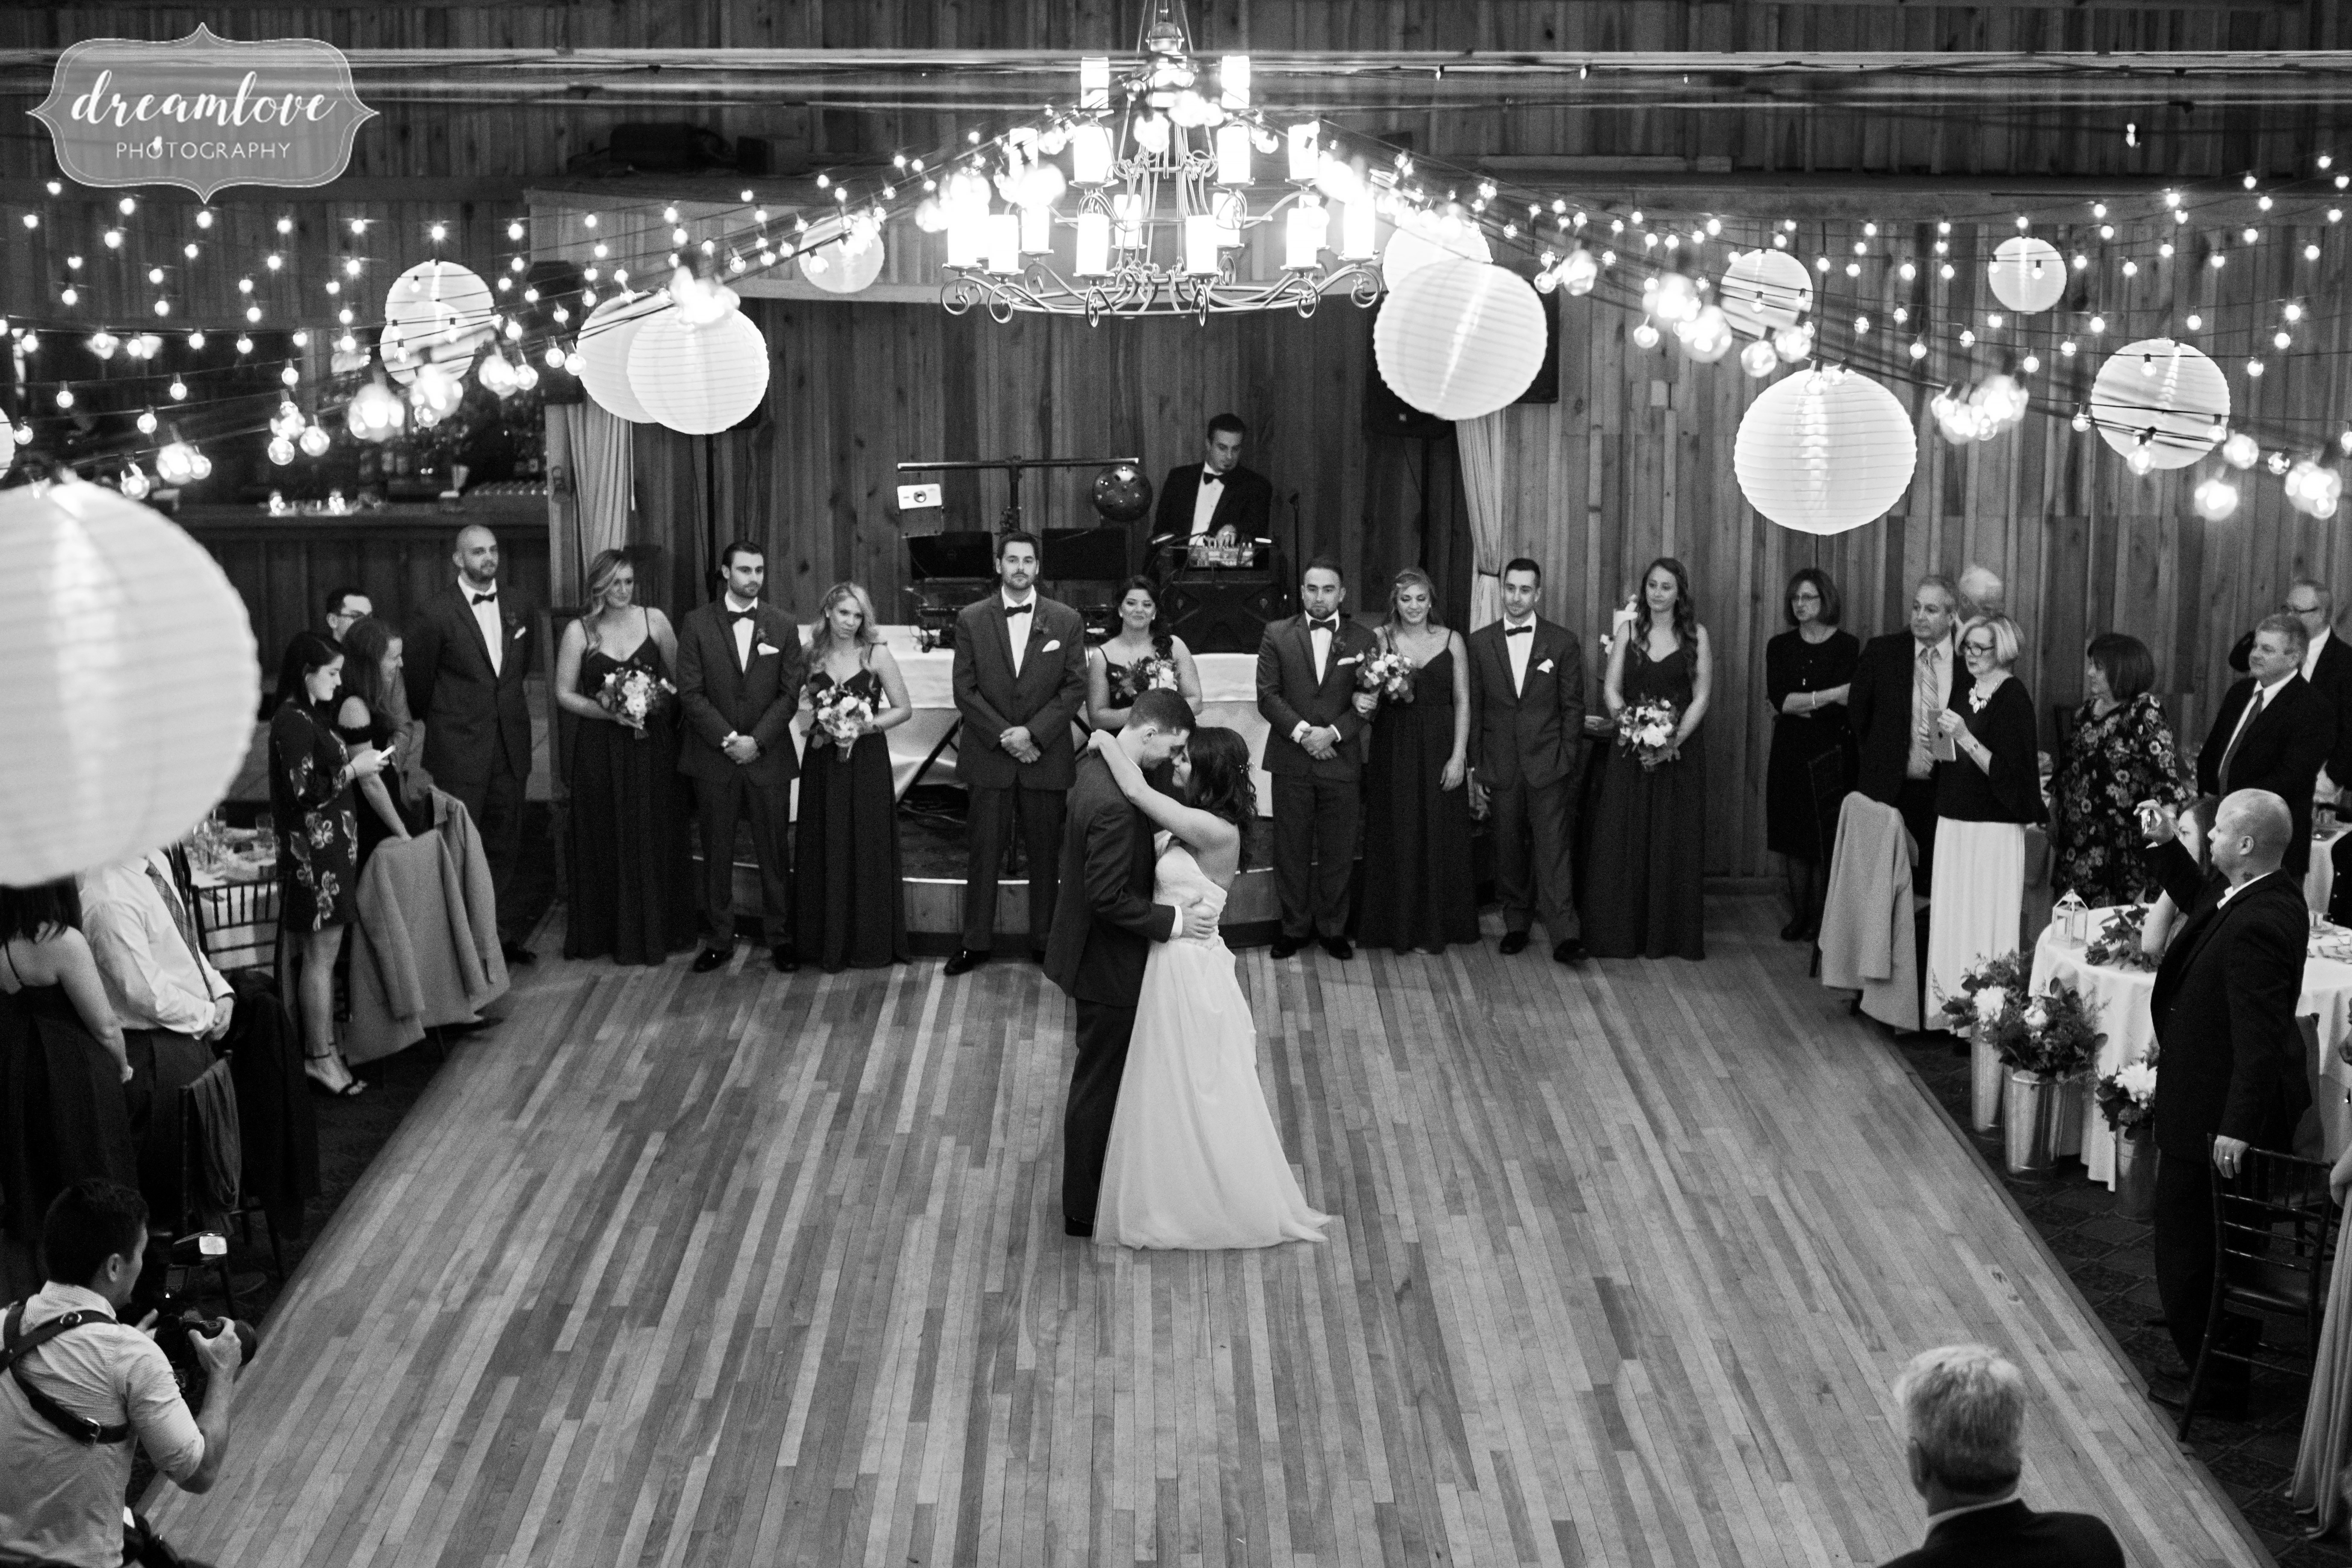 The bride and groom have their first dance in this timeless photo at the Pavilion on Crystal Lake in CT.